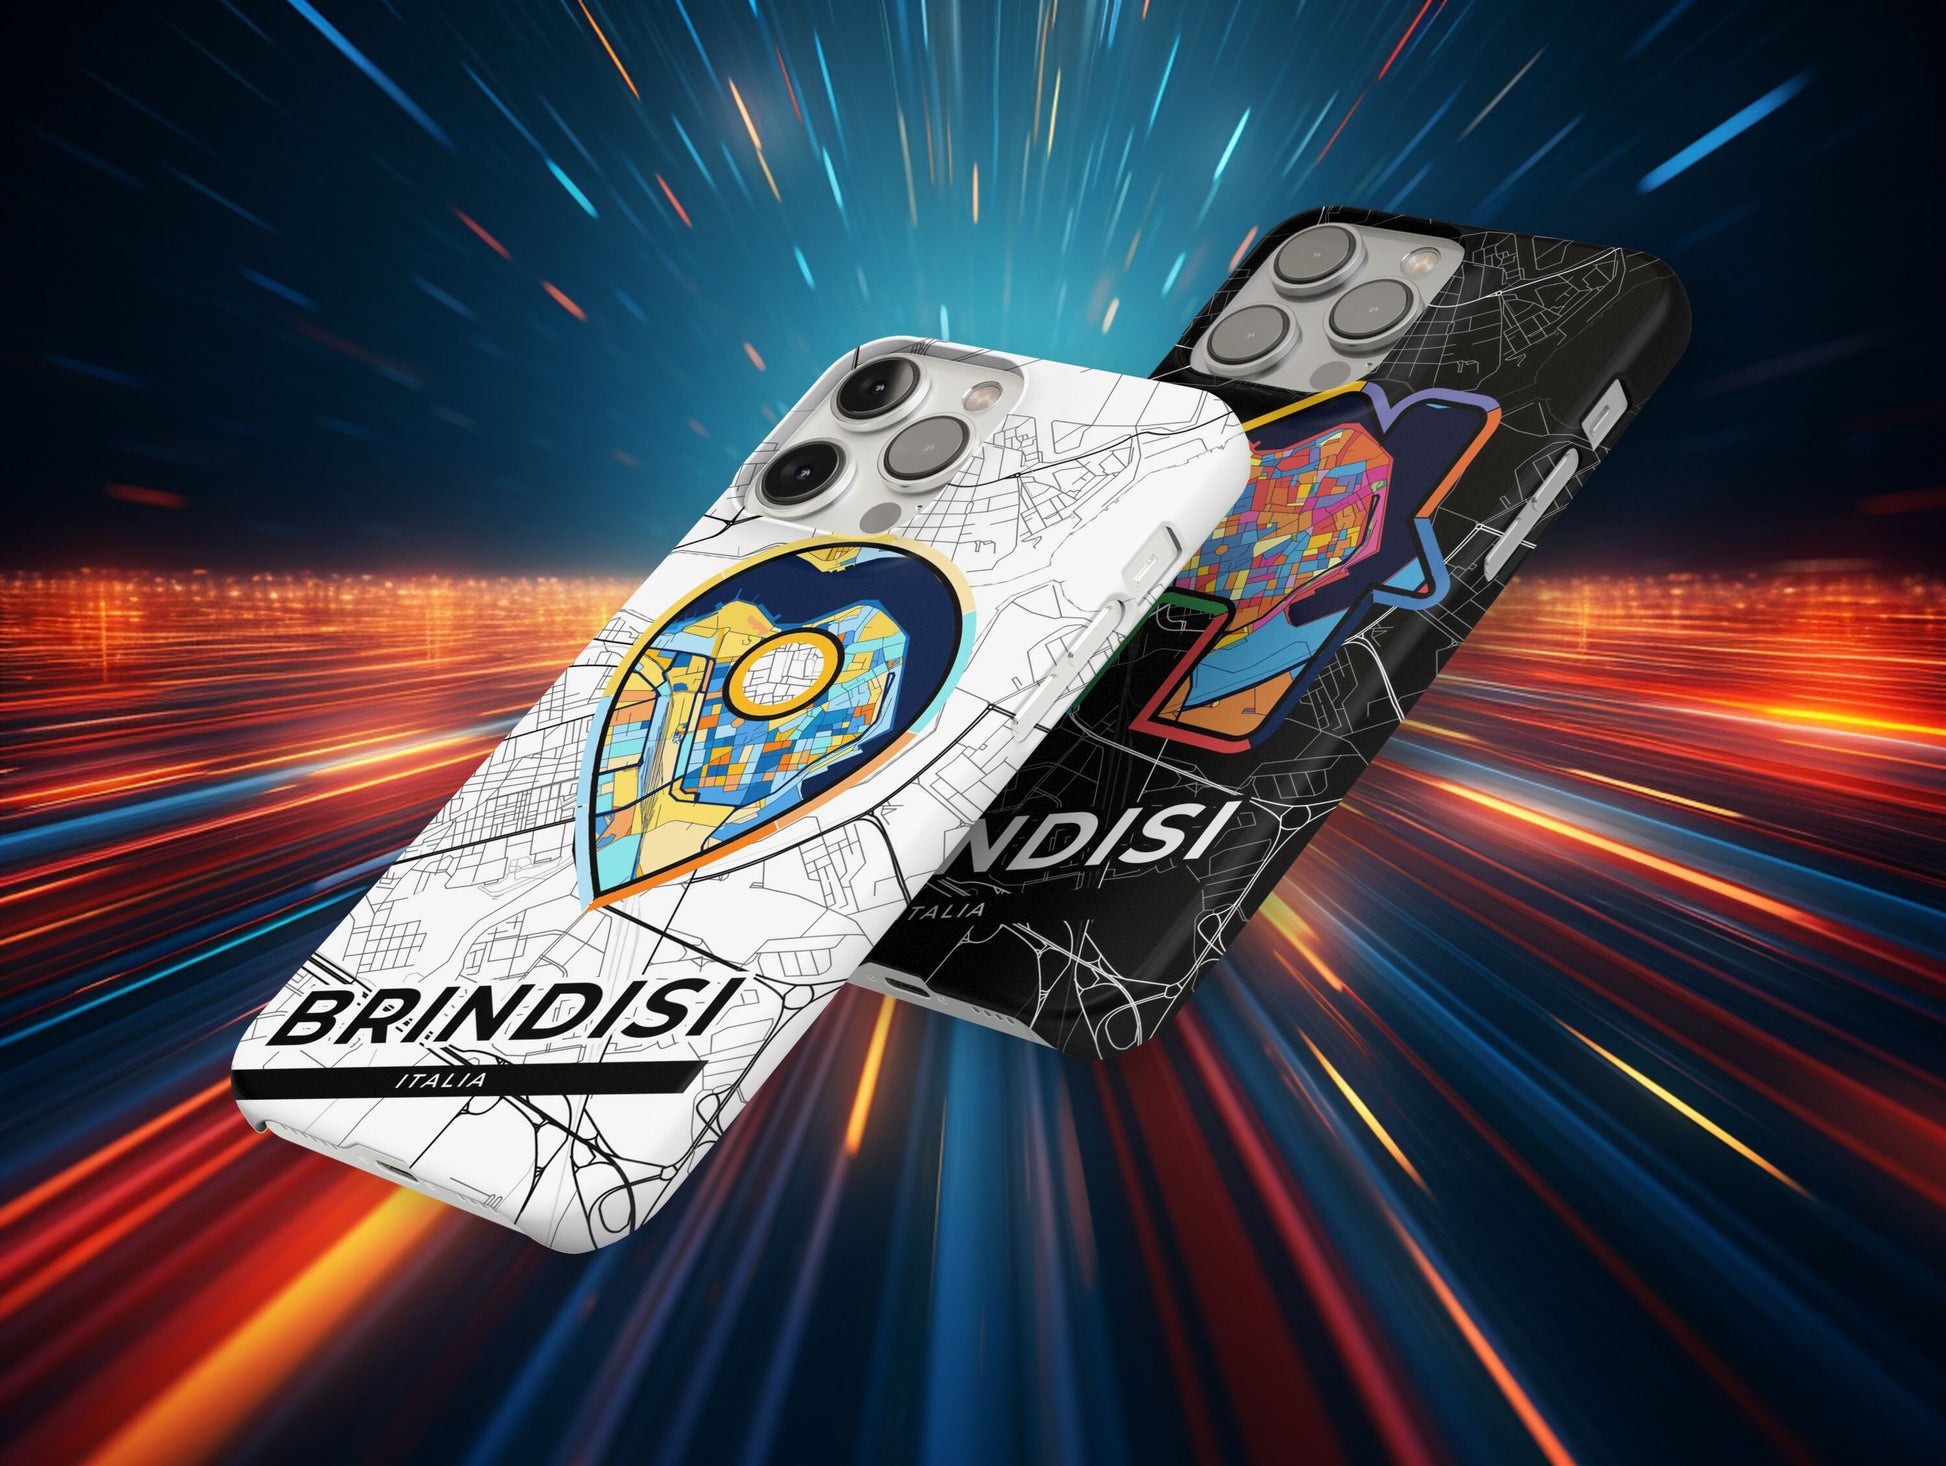 Brindisi Italy slim phone case with colorful icon. Birthday, wedding or housewarming gift. Couple match cases.